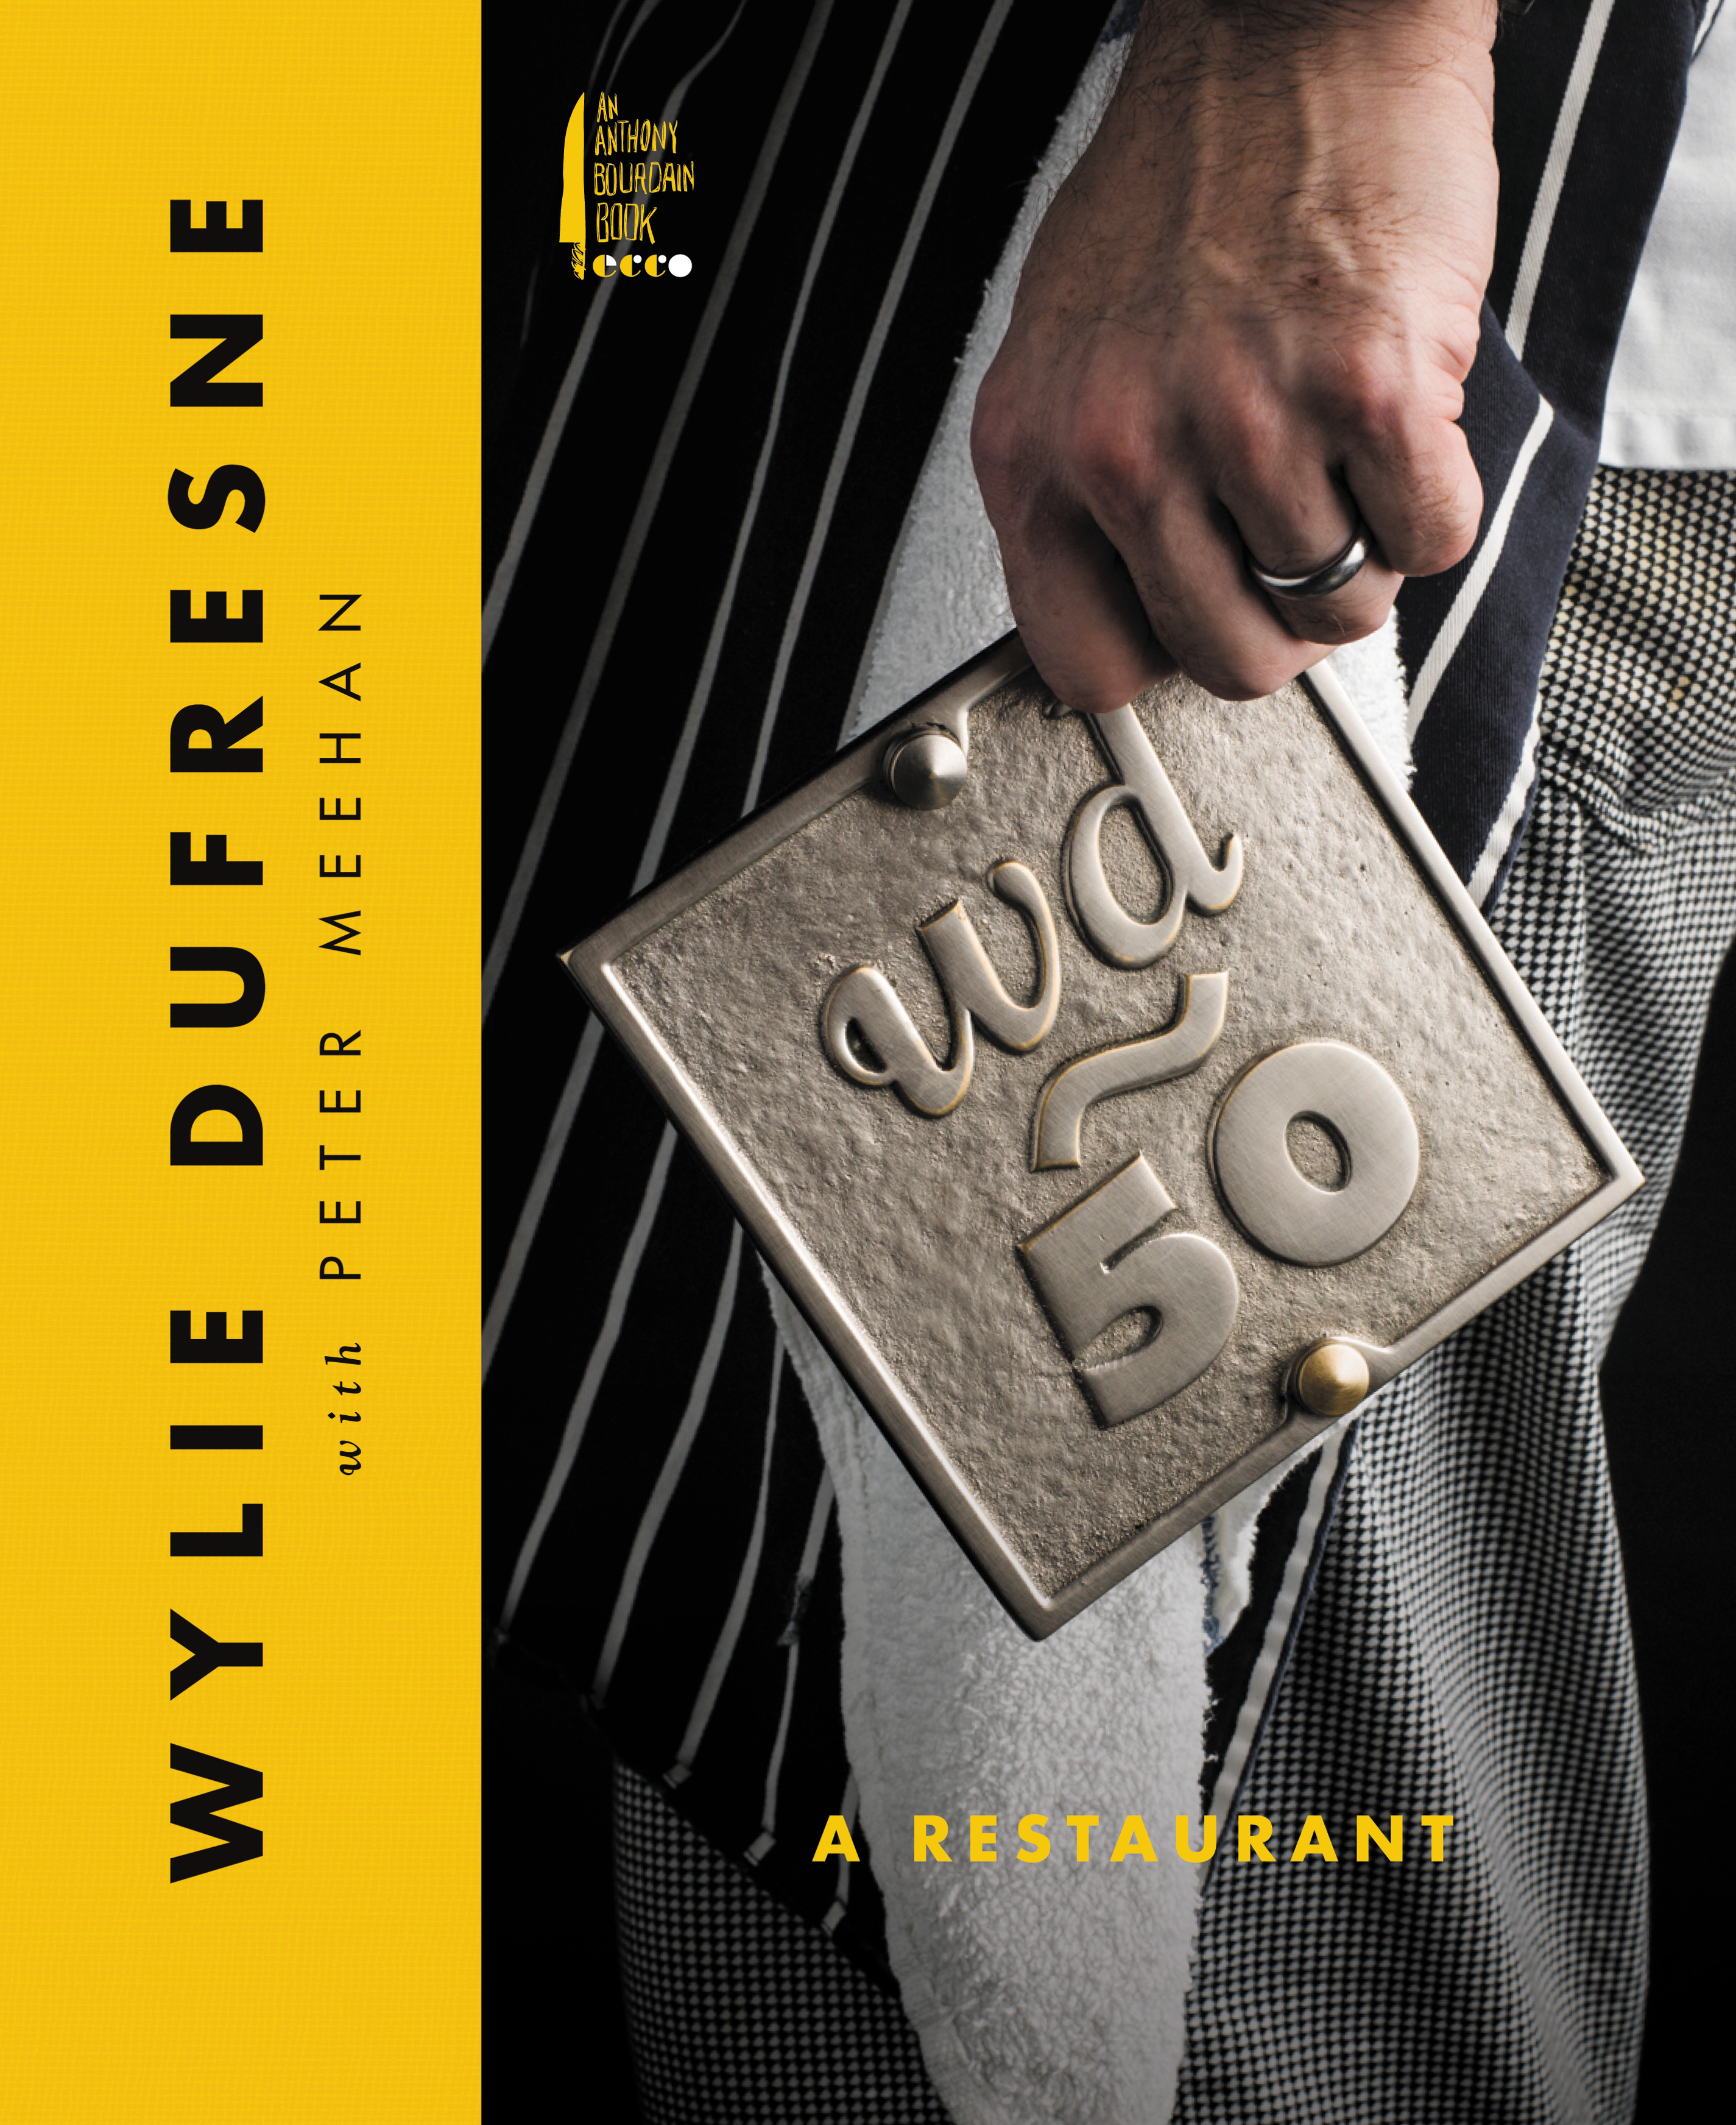 wd~50: The Cookbook by Wylie Dufresne — Public Book Signing